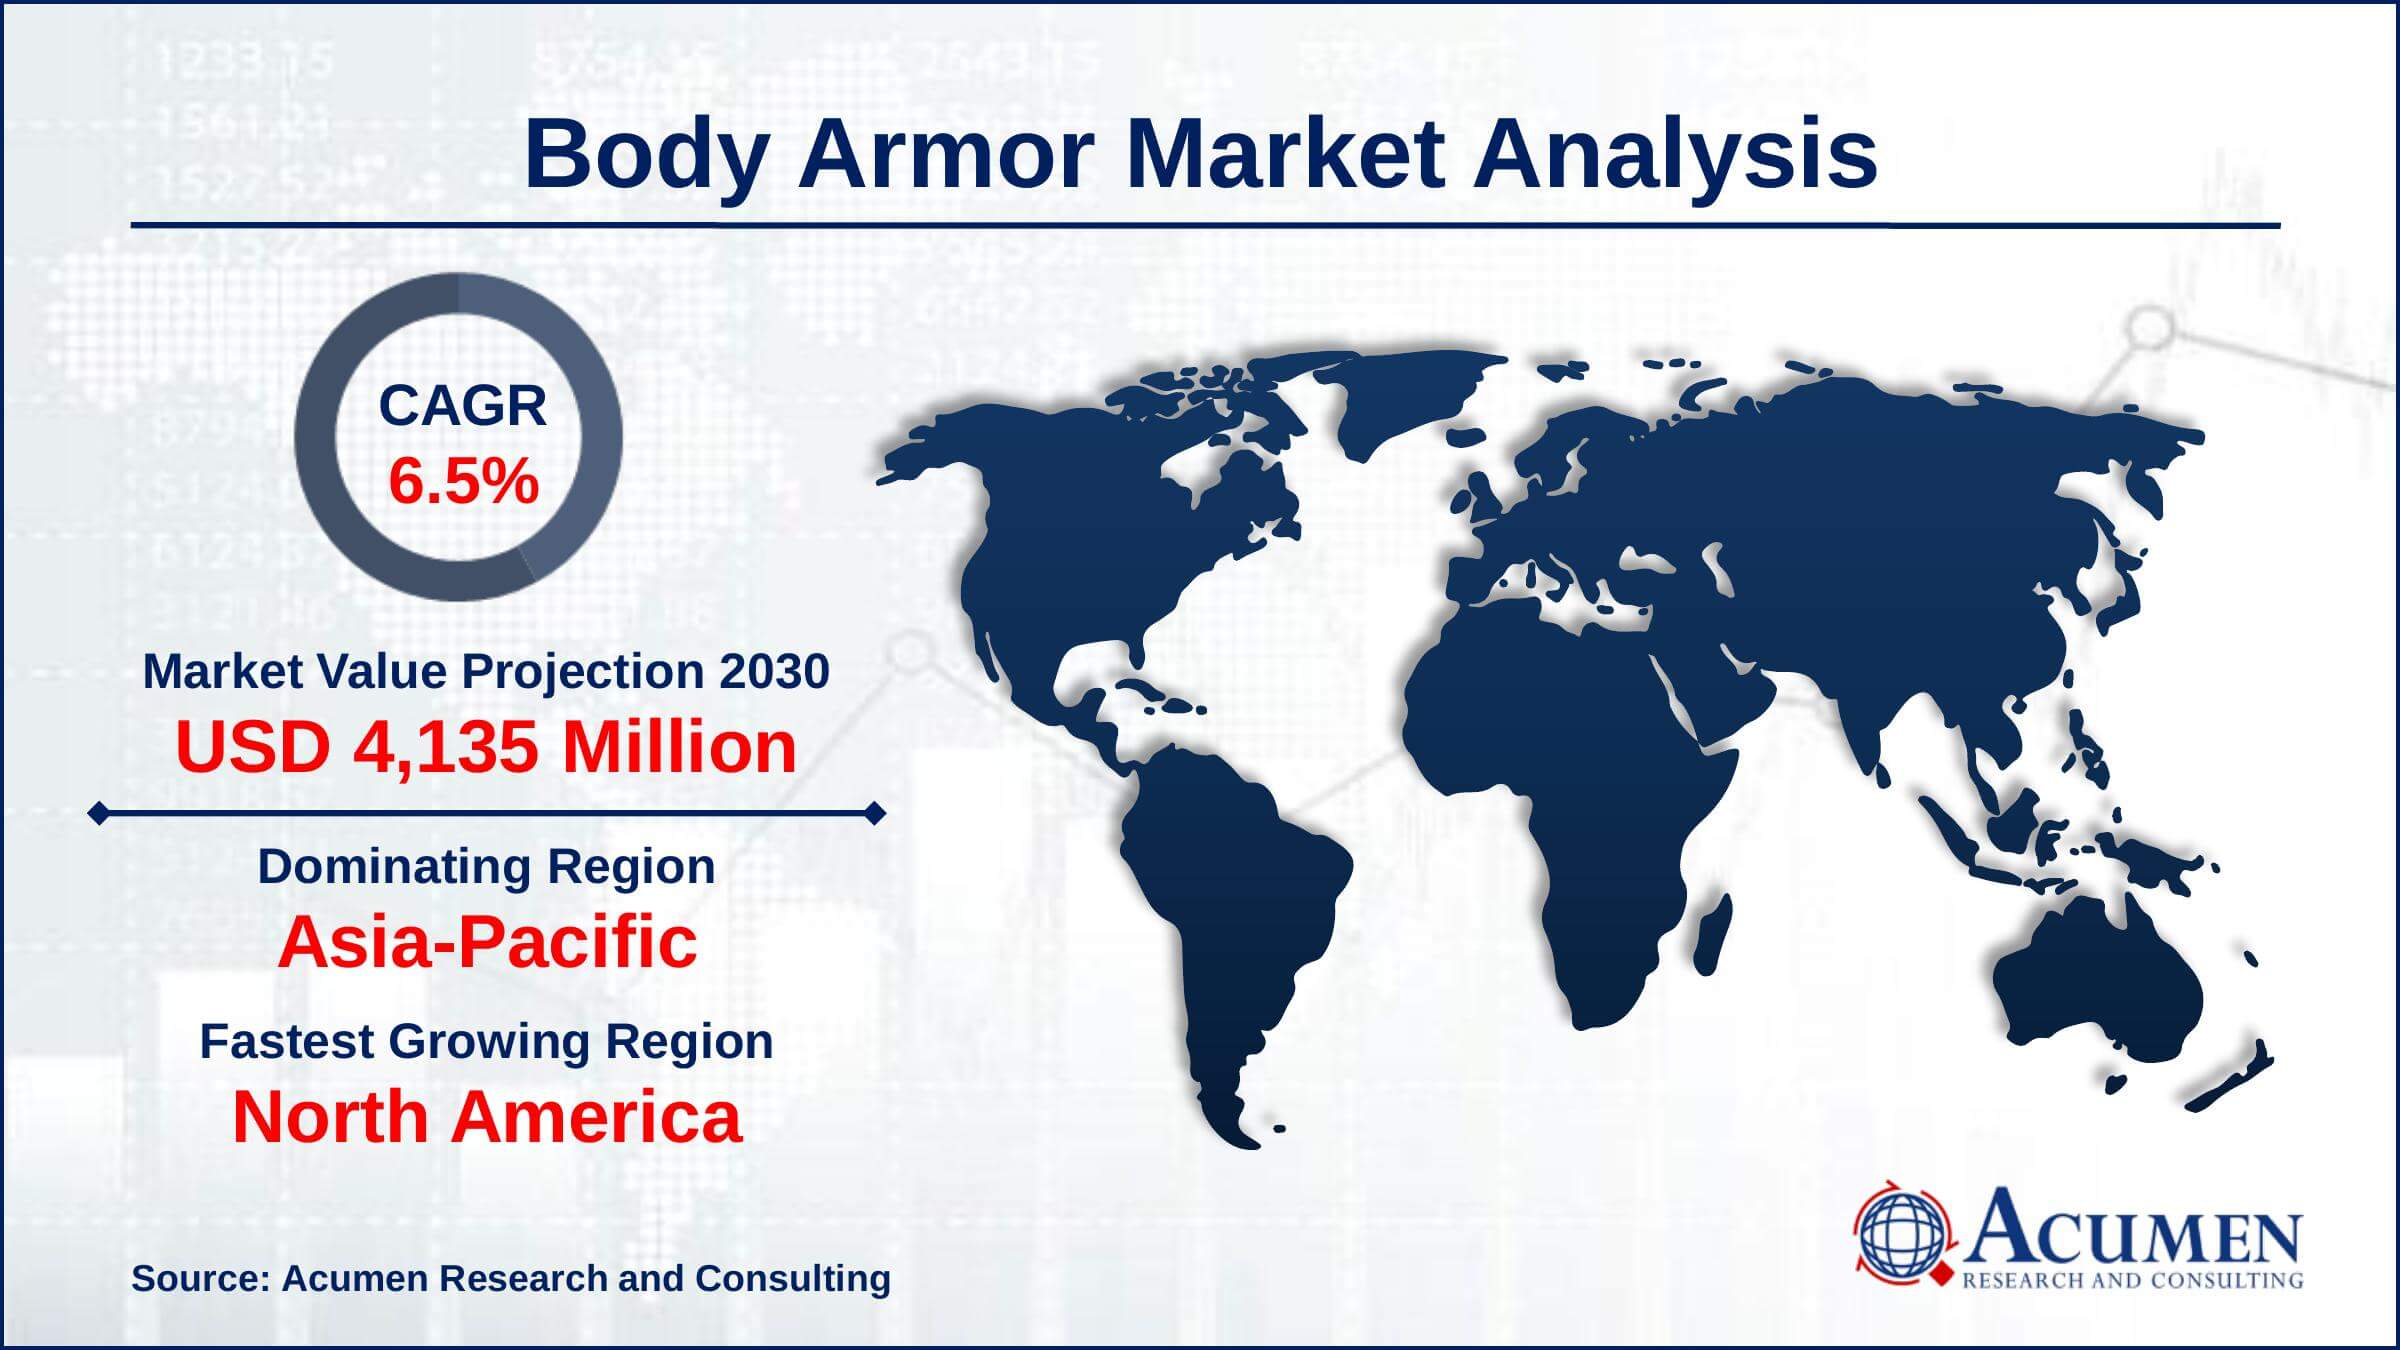 Asia-Pacific region led with more than 43% body armor market share in 2021